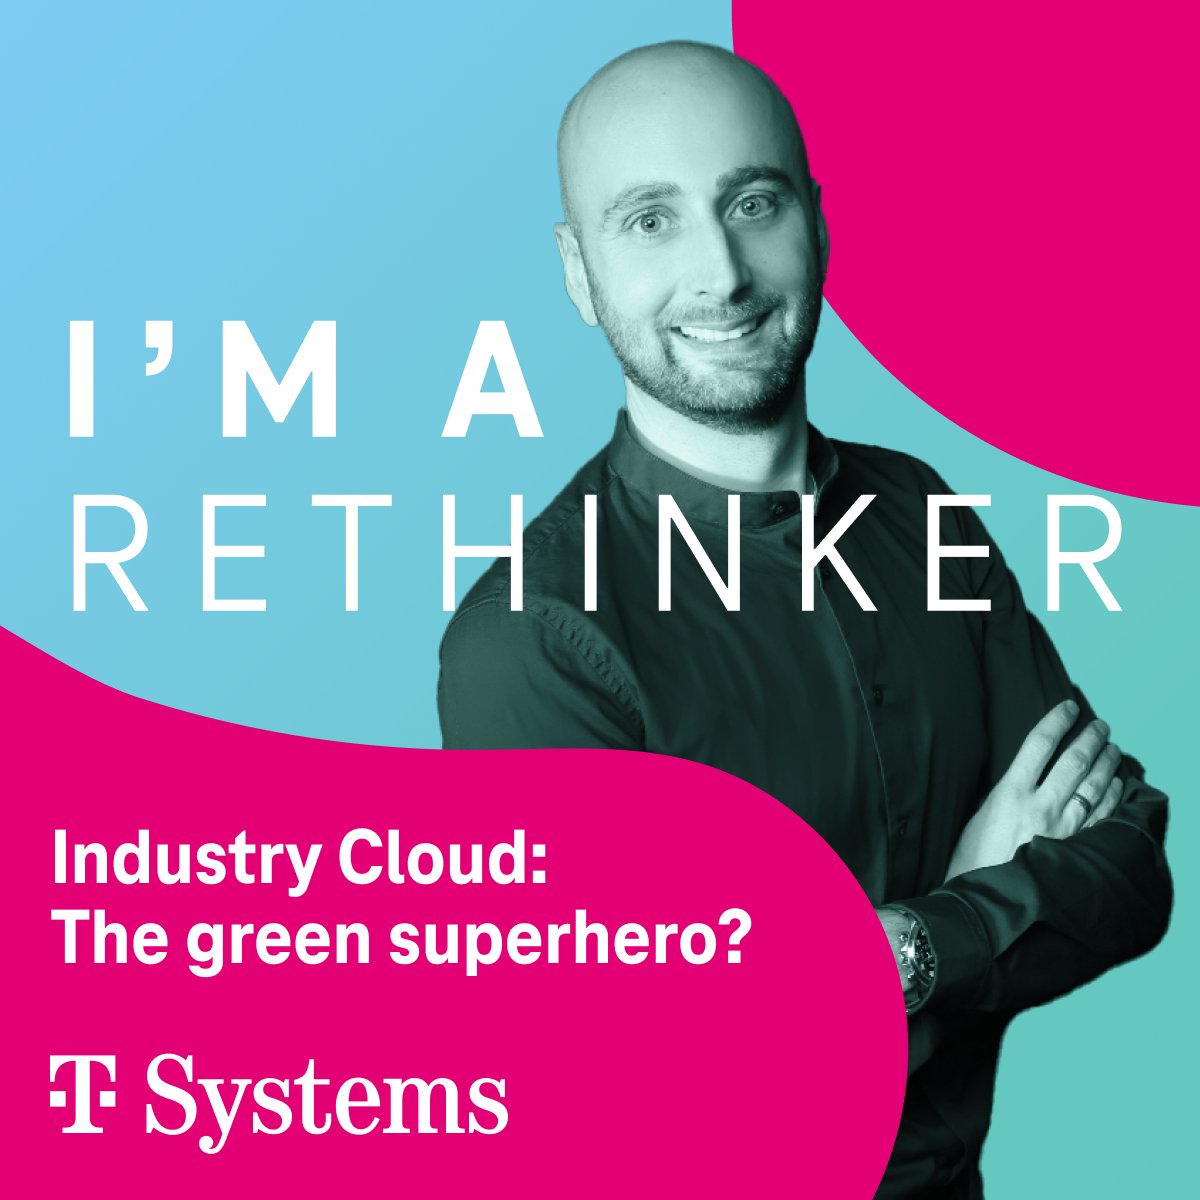 Social, sustainable and green? How can we succeed in shaping the world a little more to our liking? Find the answers in this intriguing blog article by Fabian.

#rethinkthesystem #industrycloud #sustainability  link-shortener.io/kMkd6BnwpHY0kD…